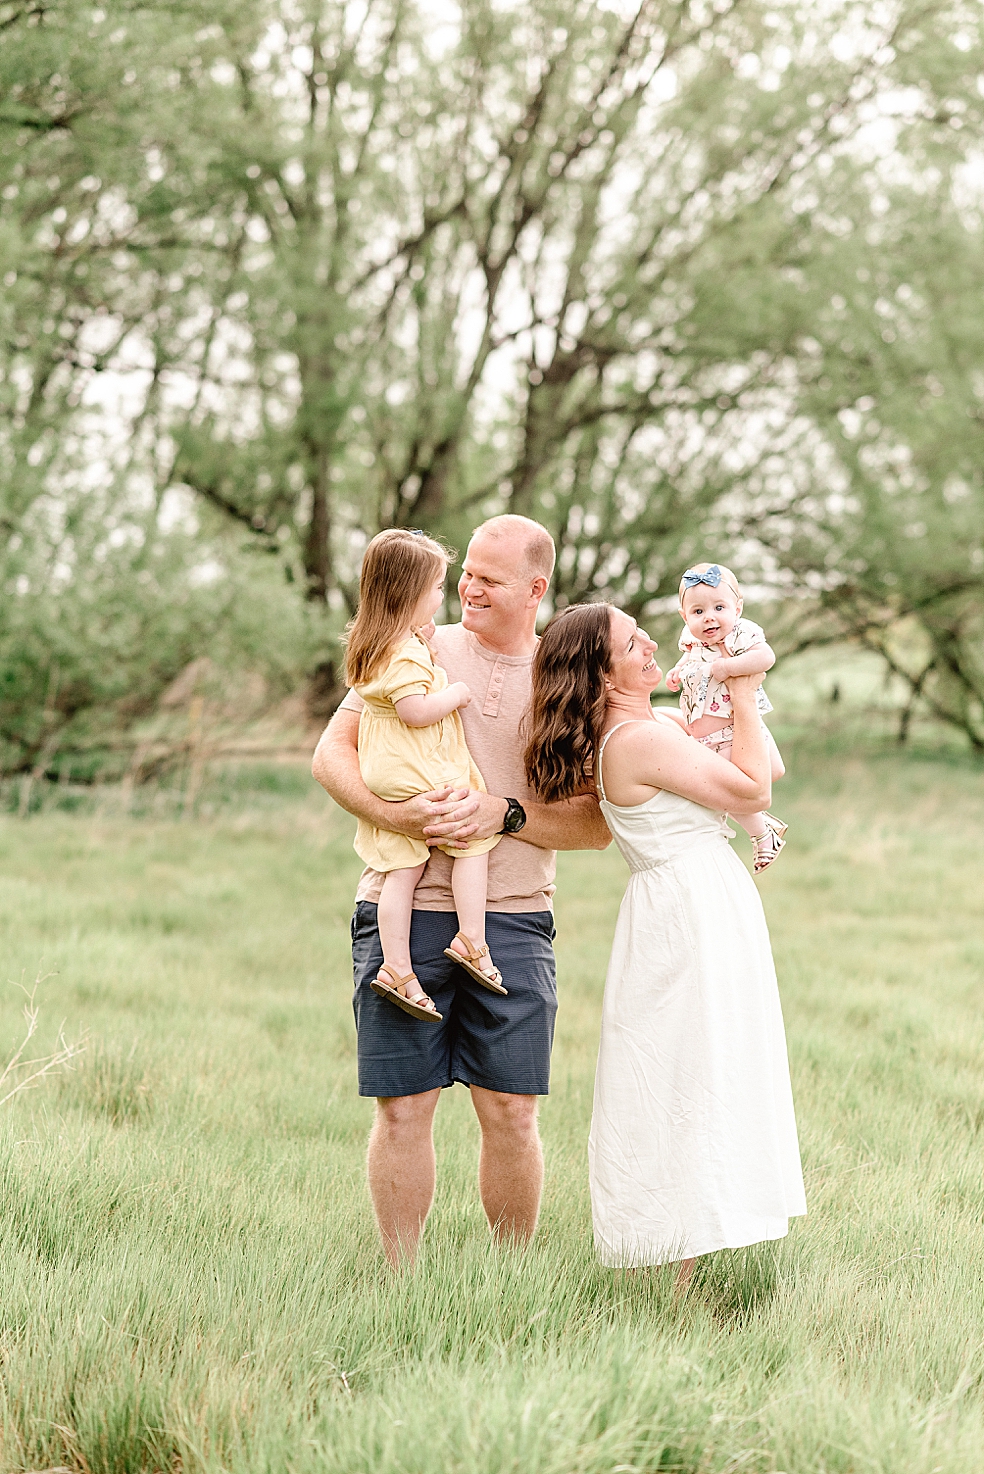 Mom and dad playing with their girls in a field | Photo by Light and Airy Alabama Photographer Jessica Lee 